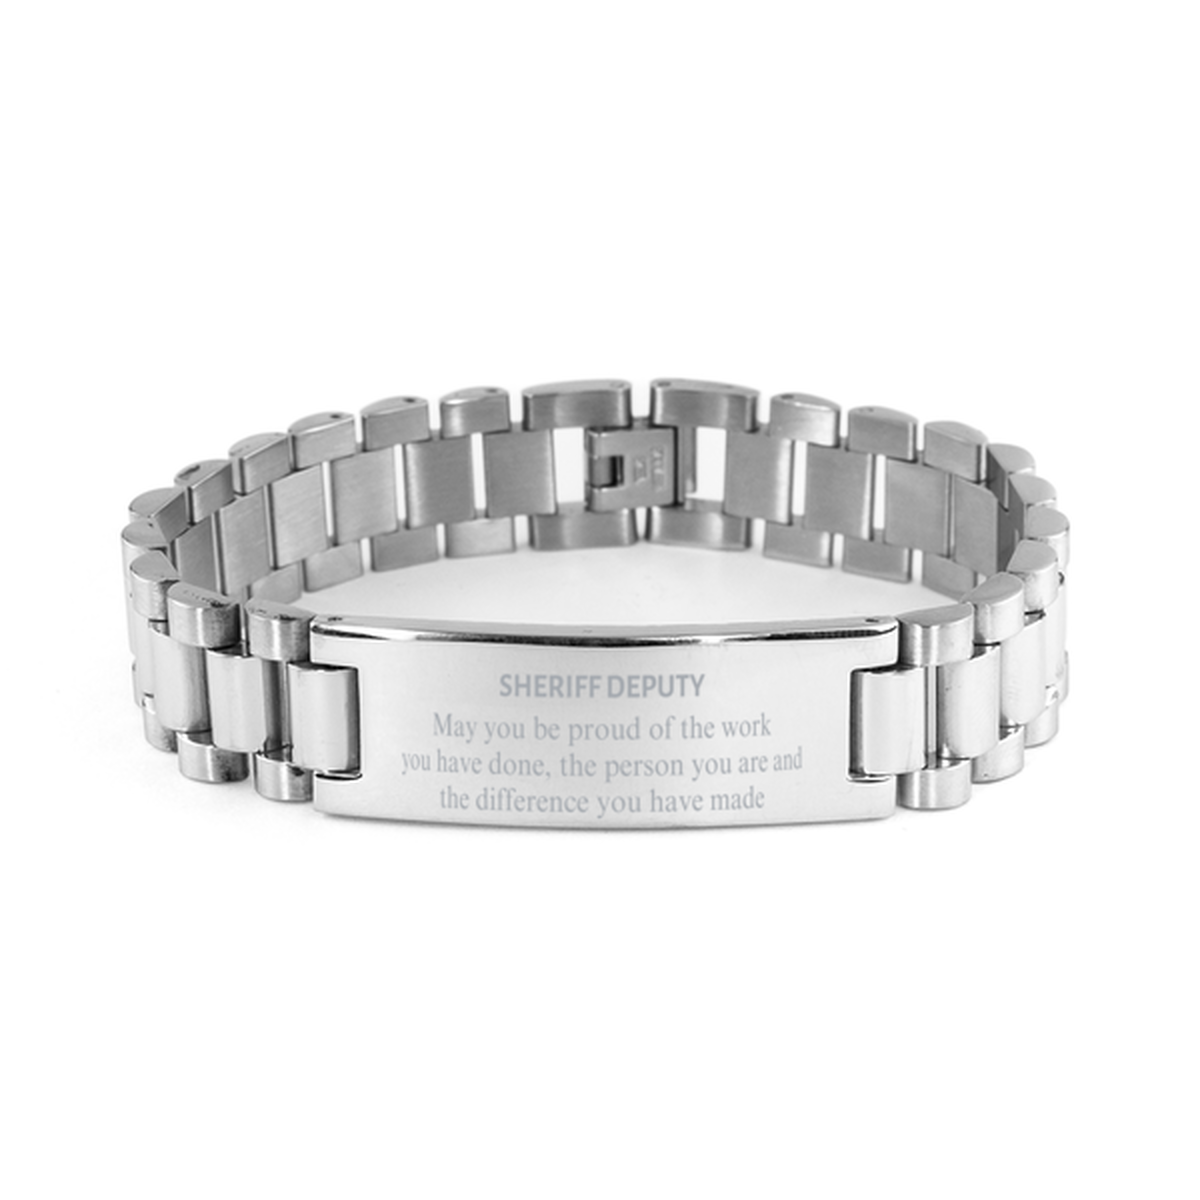 Sheriff Deputy May you be proud of the work you have done, Retirement Sheriff Deputy Ladder Stainless Steel Bracelet for Colleague Appreciation Gifts Amazing for Sheriff Deputy